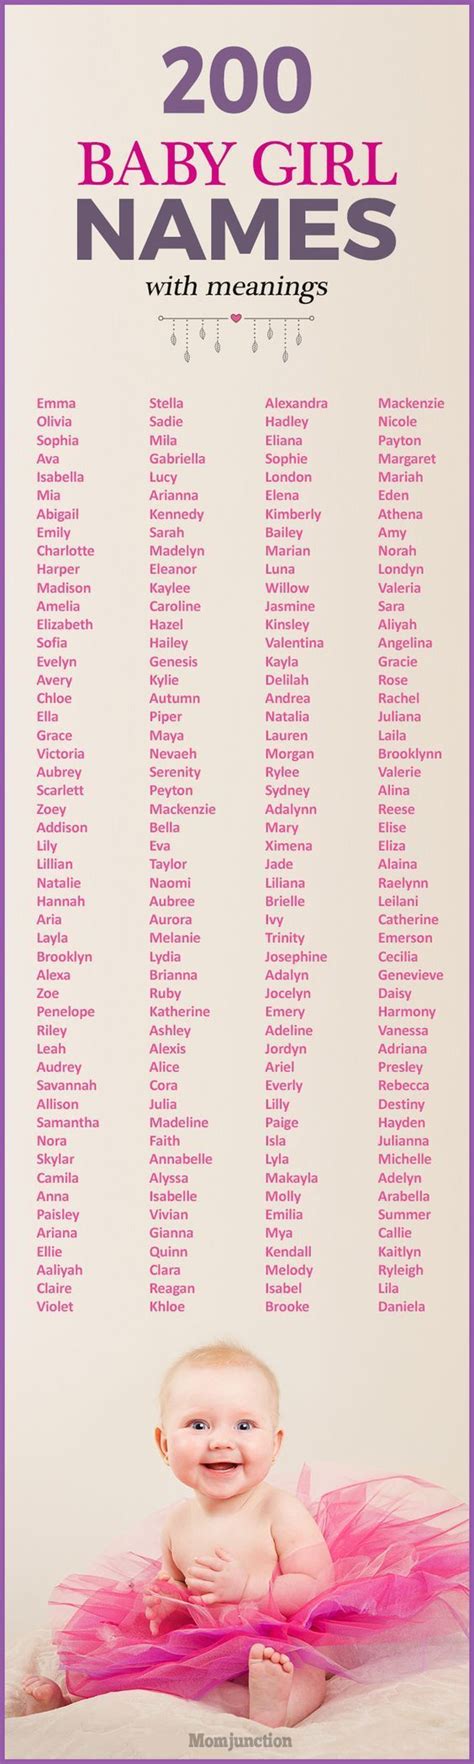 200 Baby Girl Names With Meanings Popular Baby Girl Names Top Baby